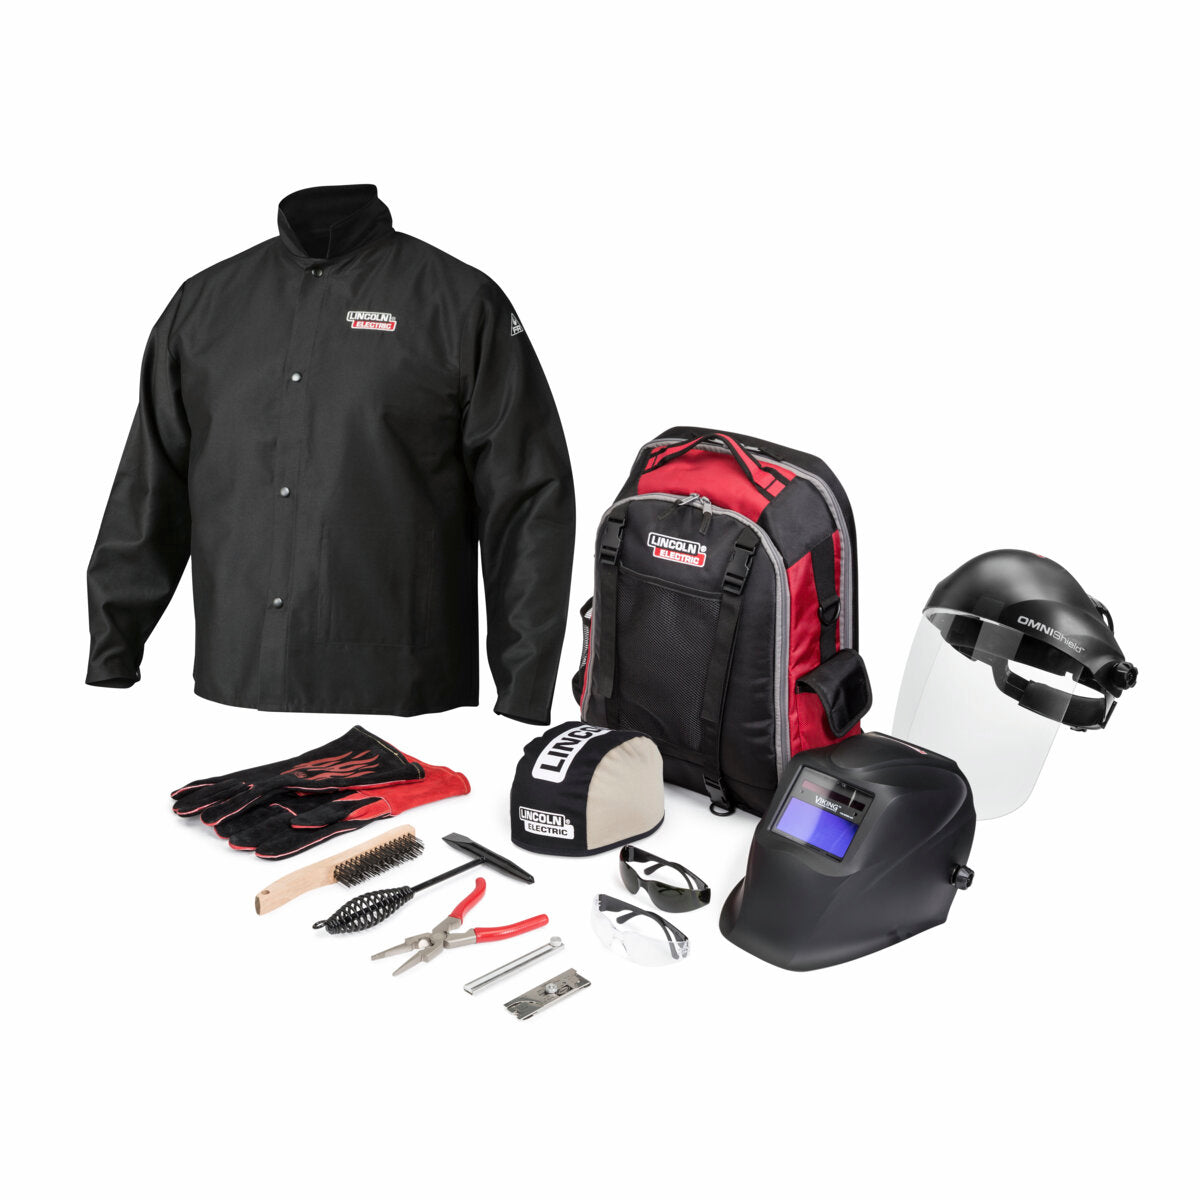 Lincoln Electric - Introductory Education Welding Gear Ready-Pak® - L - K4590-L